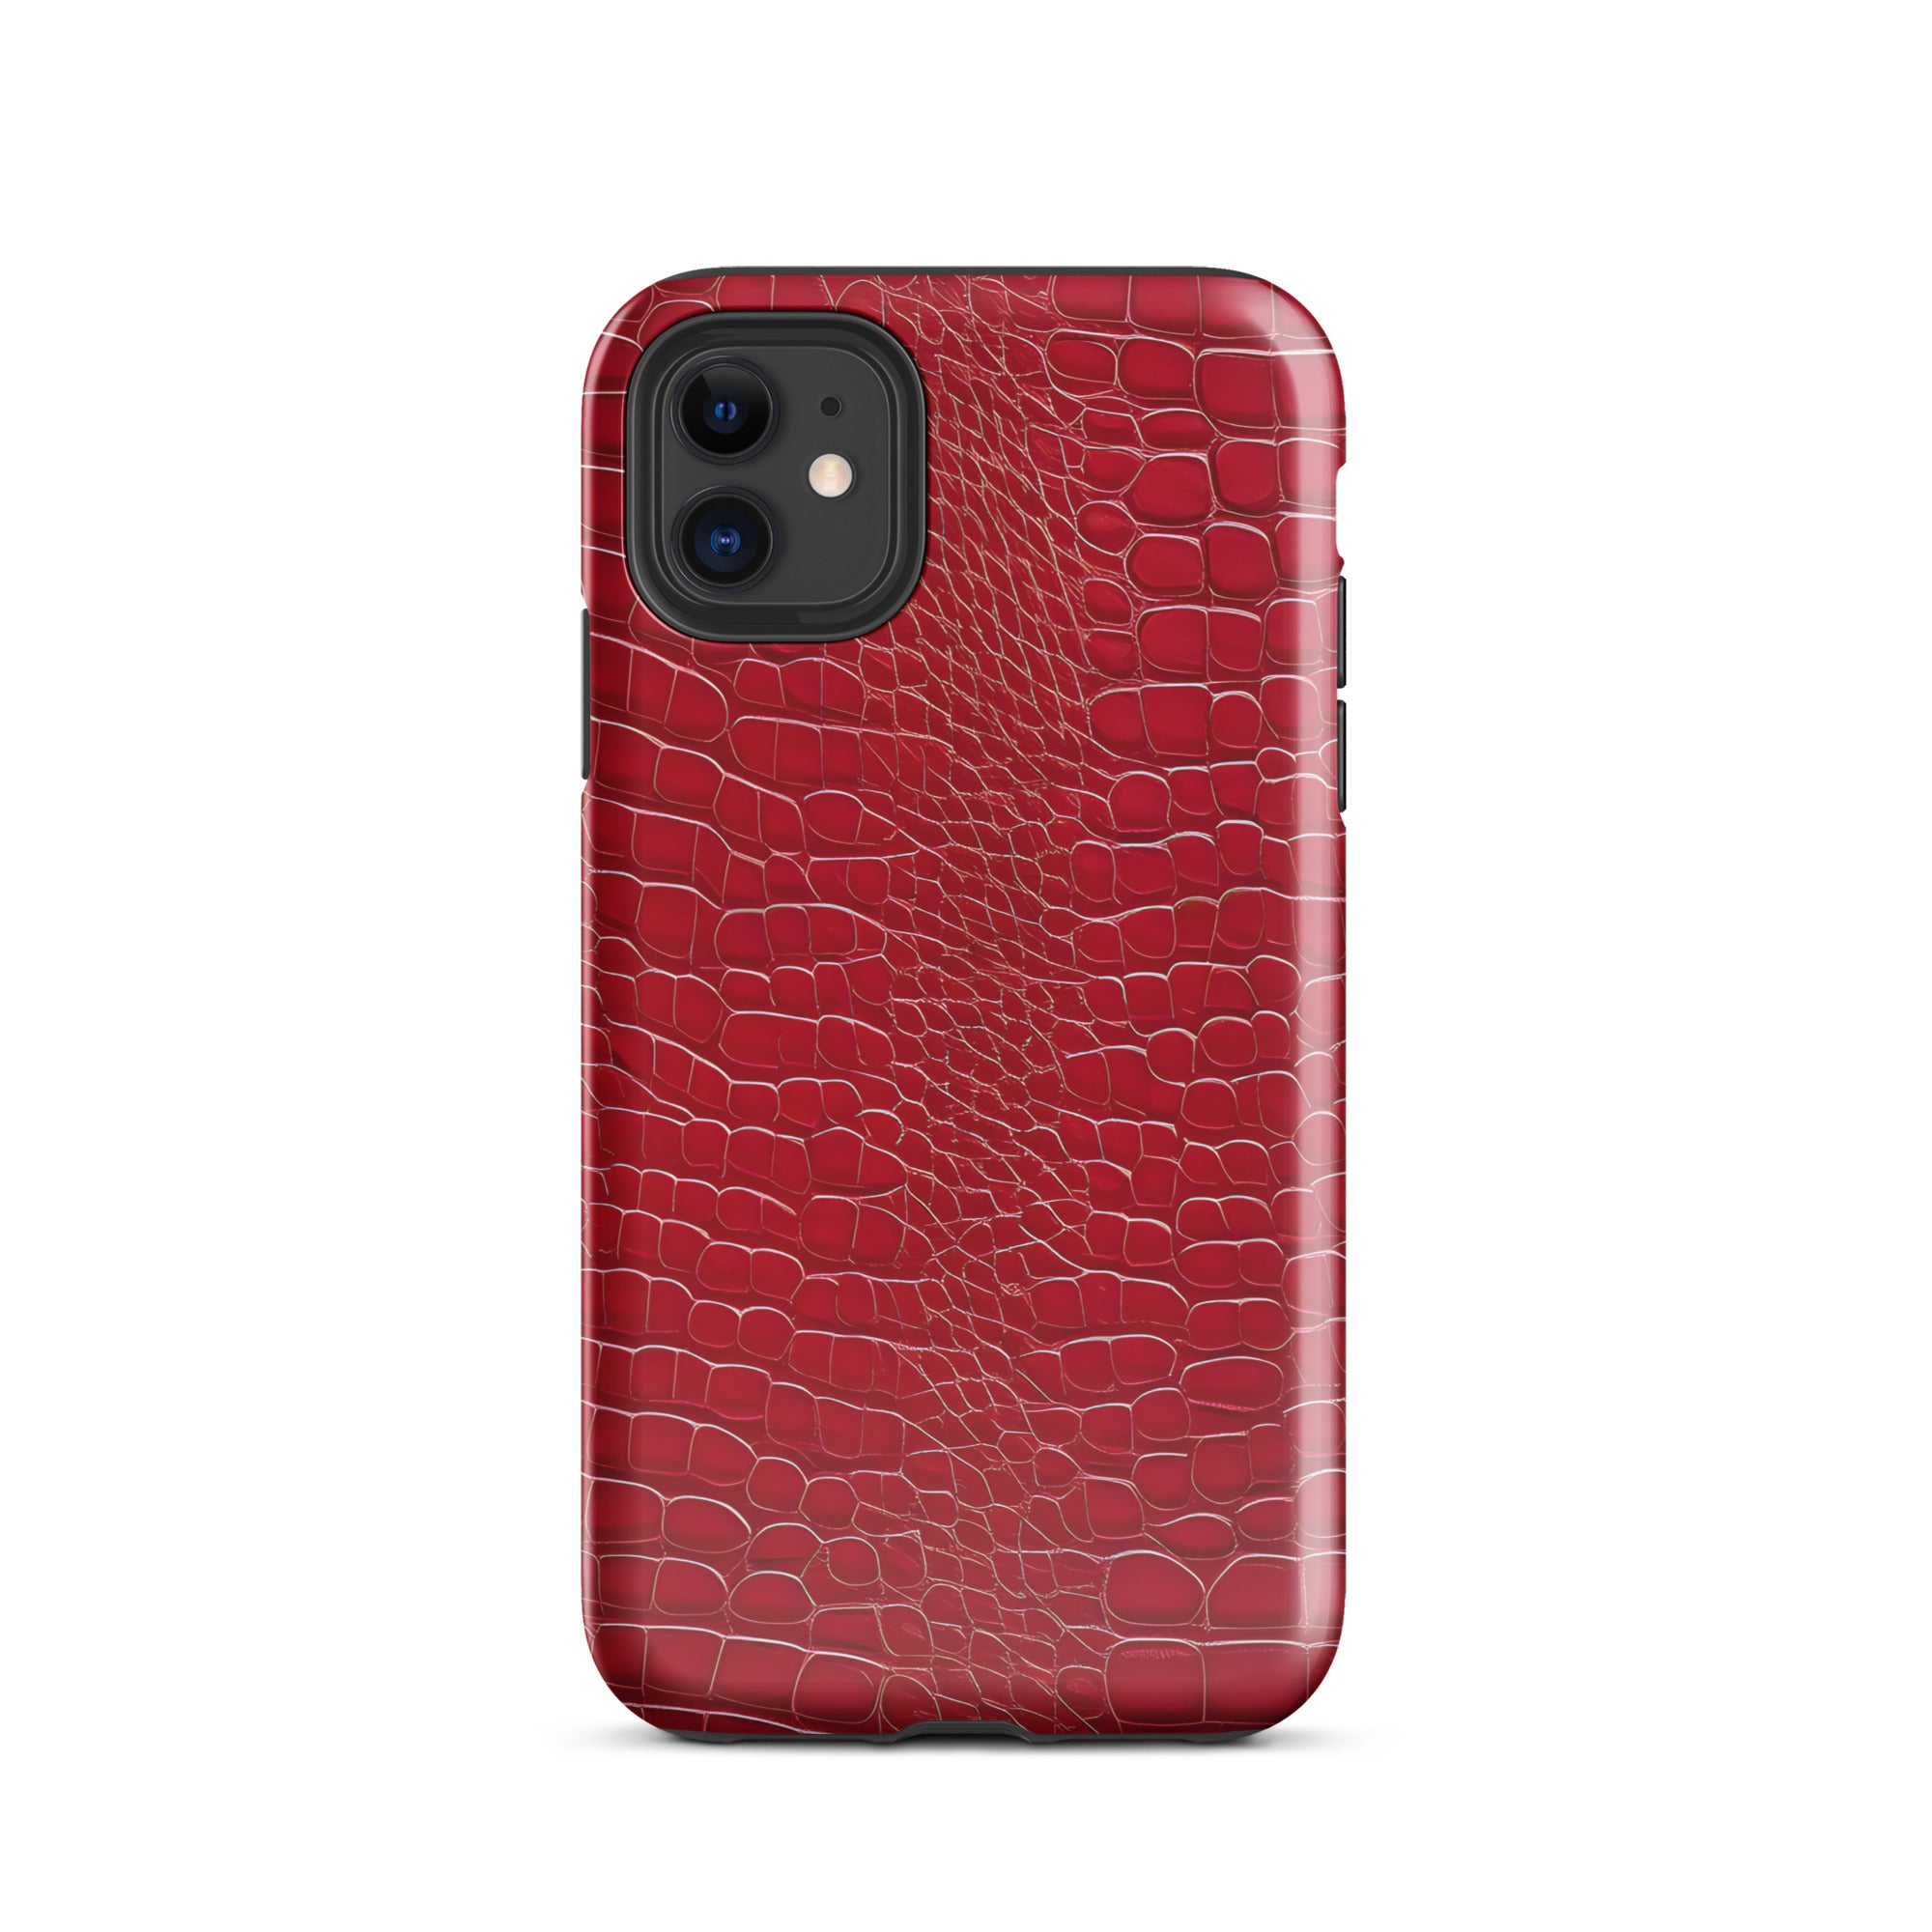 tough-case-for-iphone-glossy-iphone-11-front-656383d5b48b2.jpg